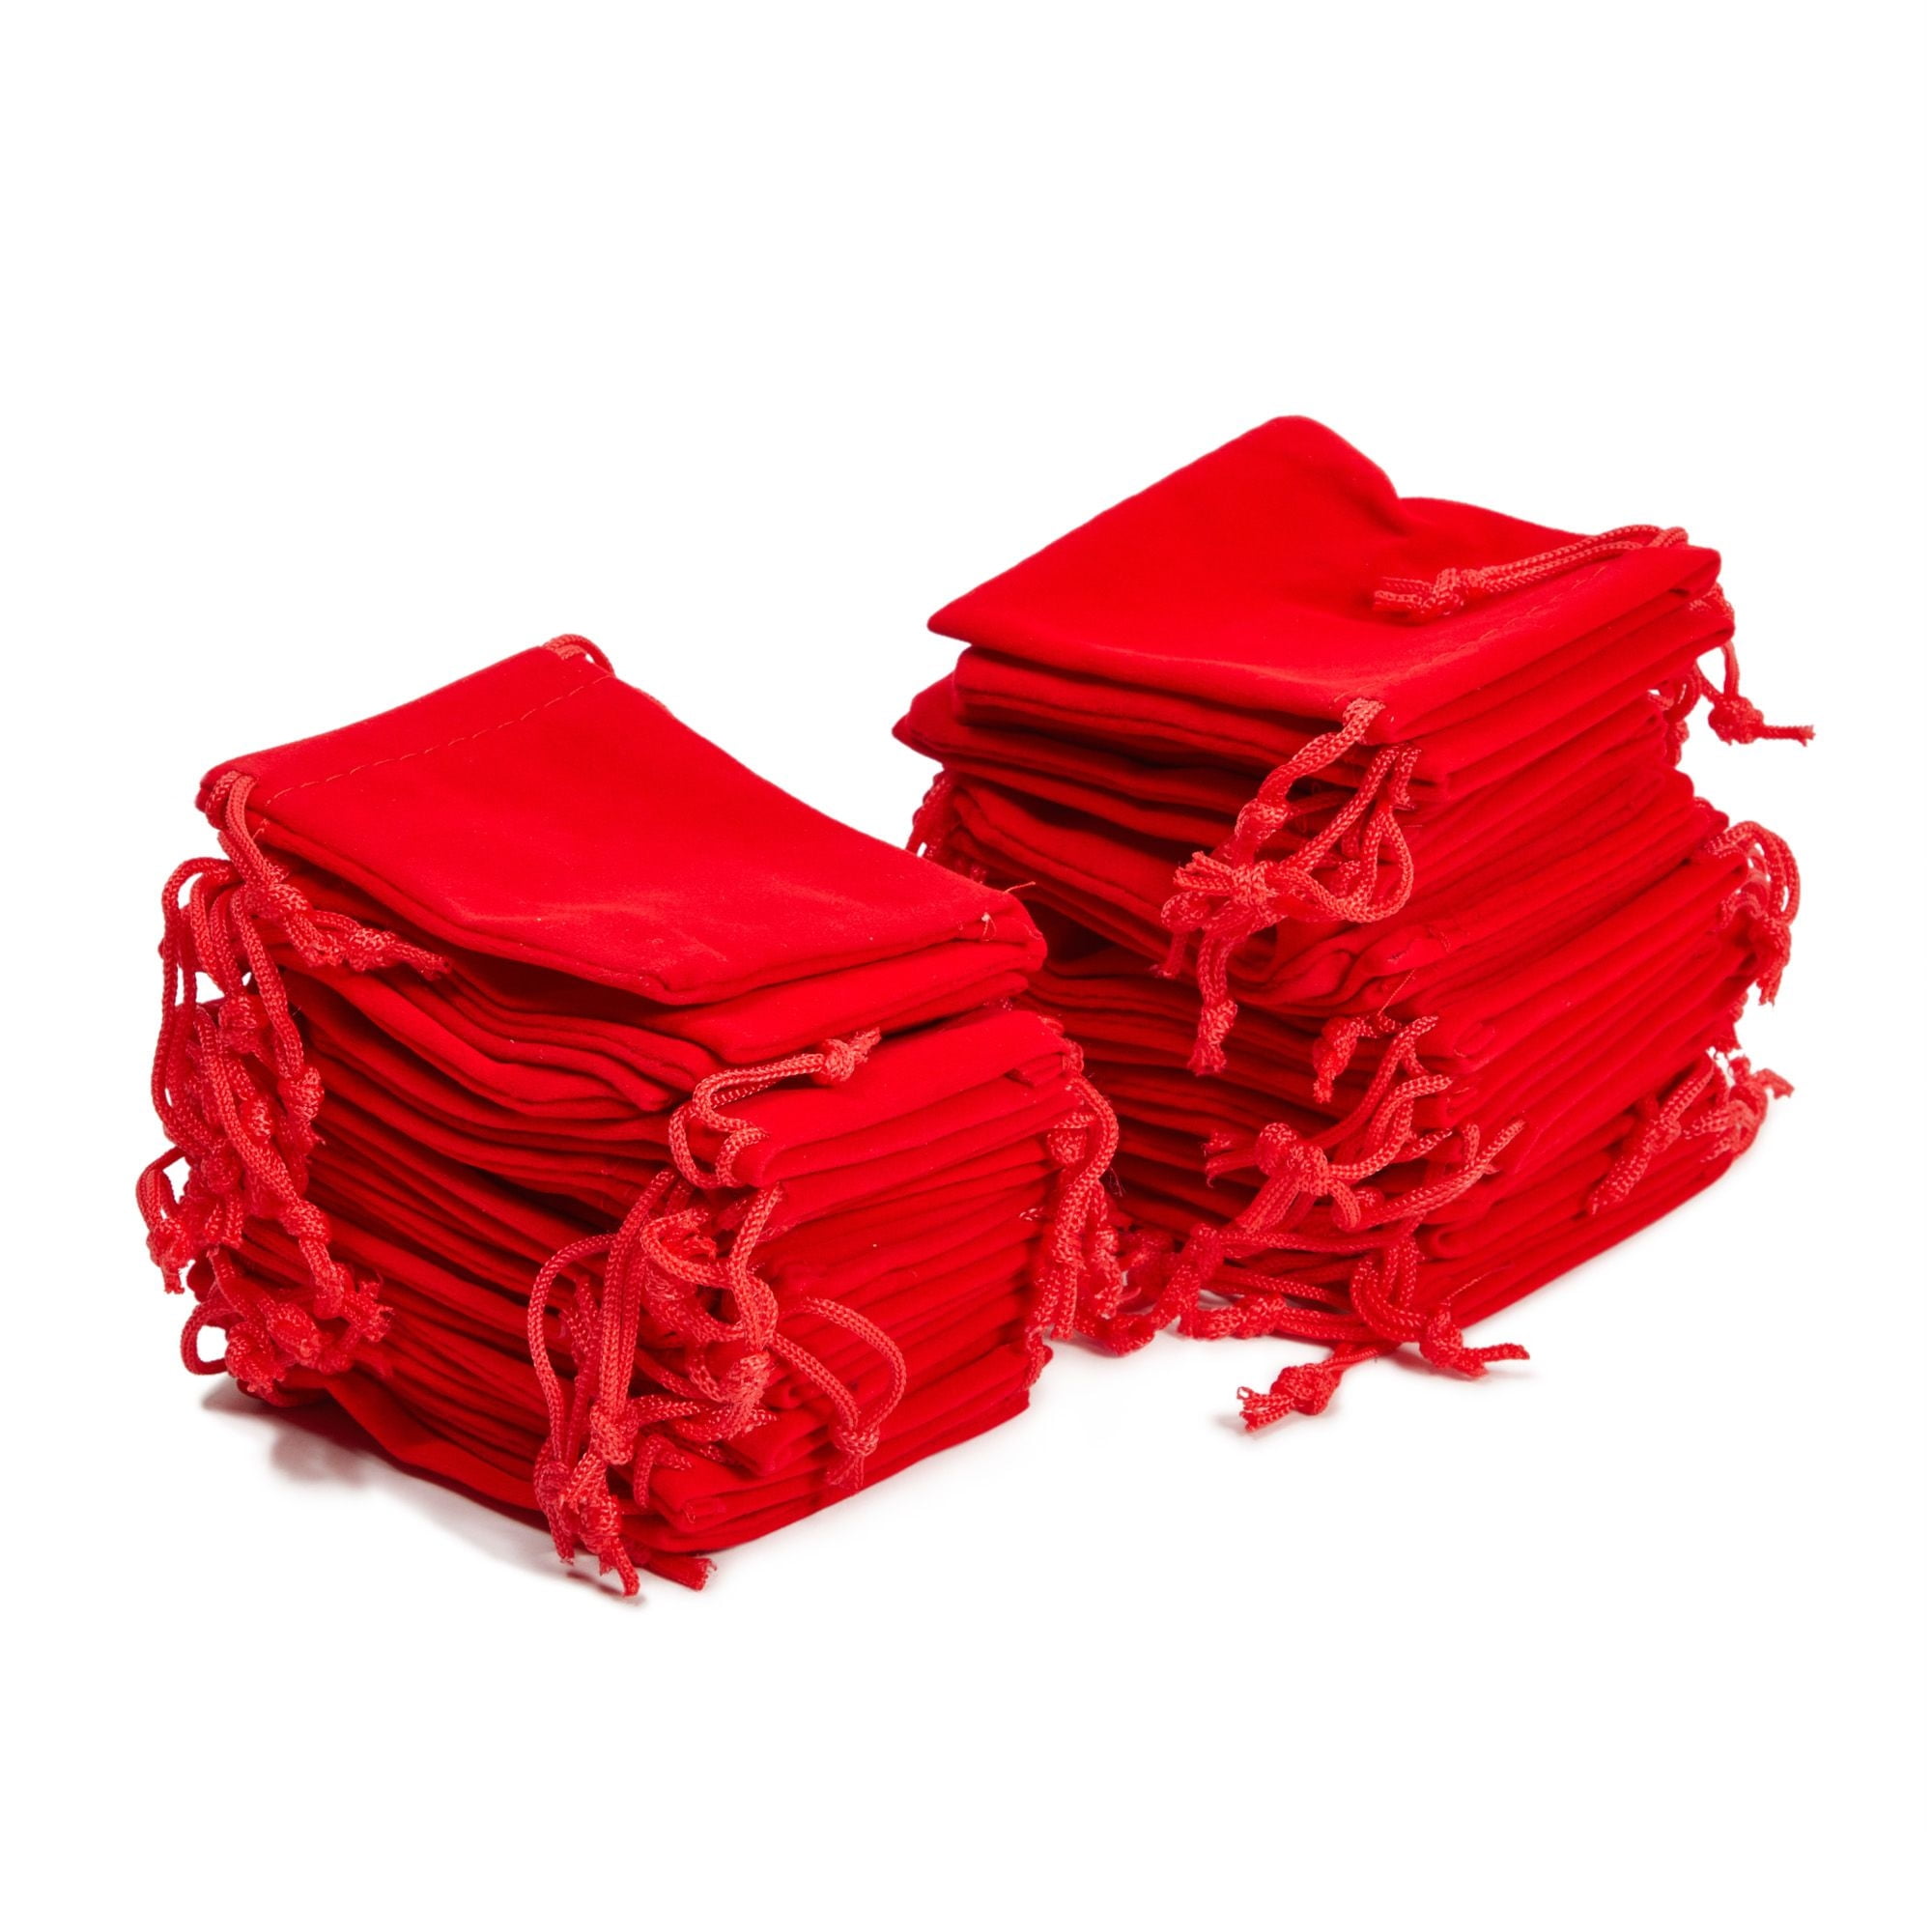 Gusseted Velvet Pouches - 8 x 8 x 5, Red S-11625R - Uline